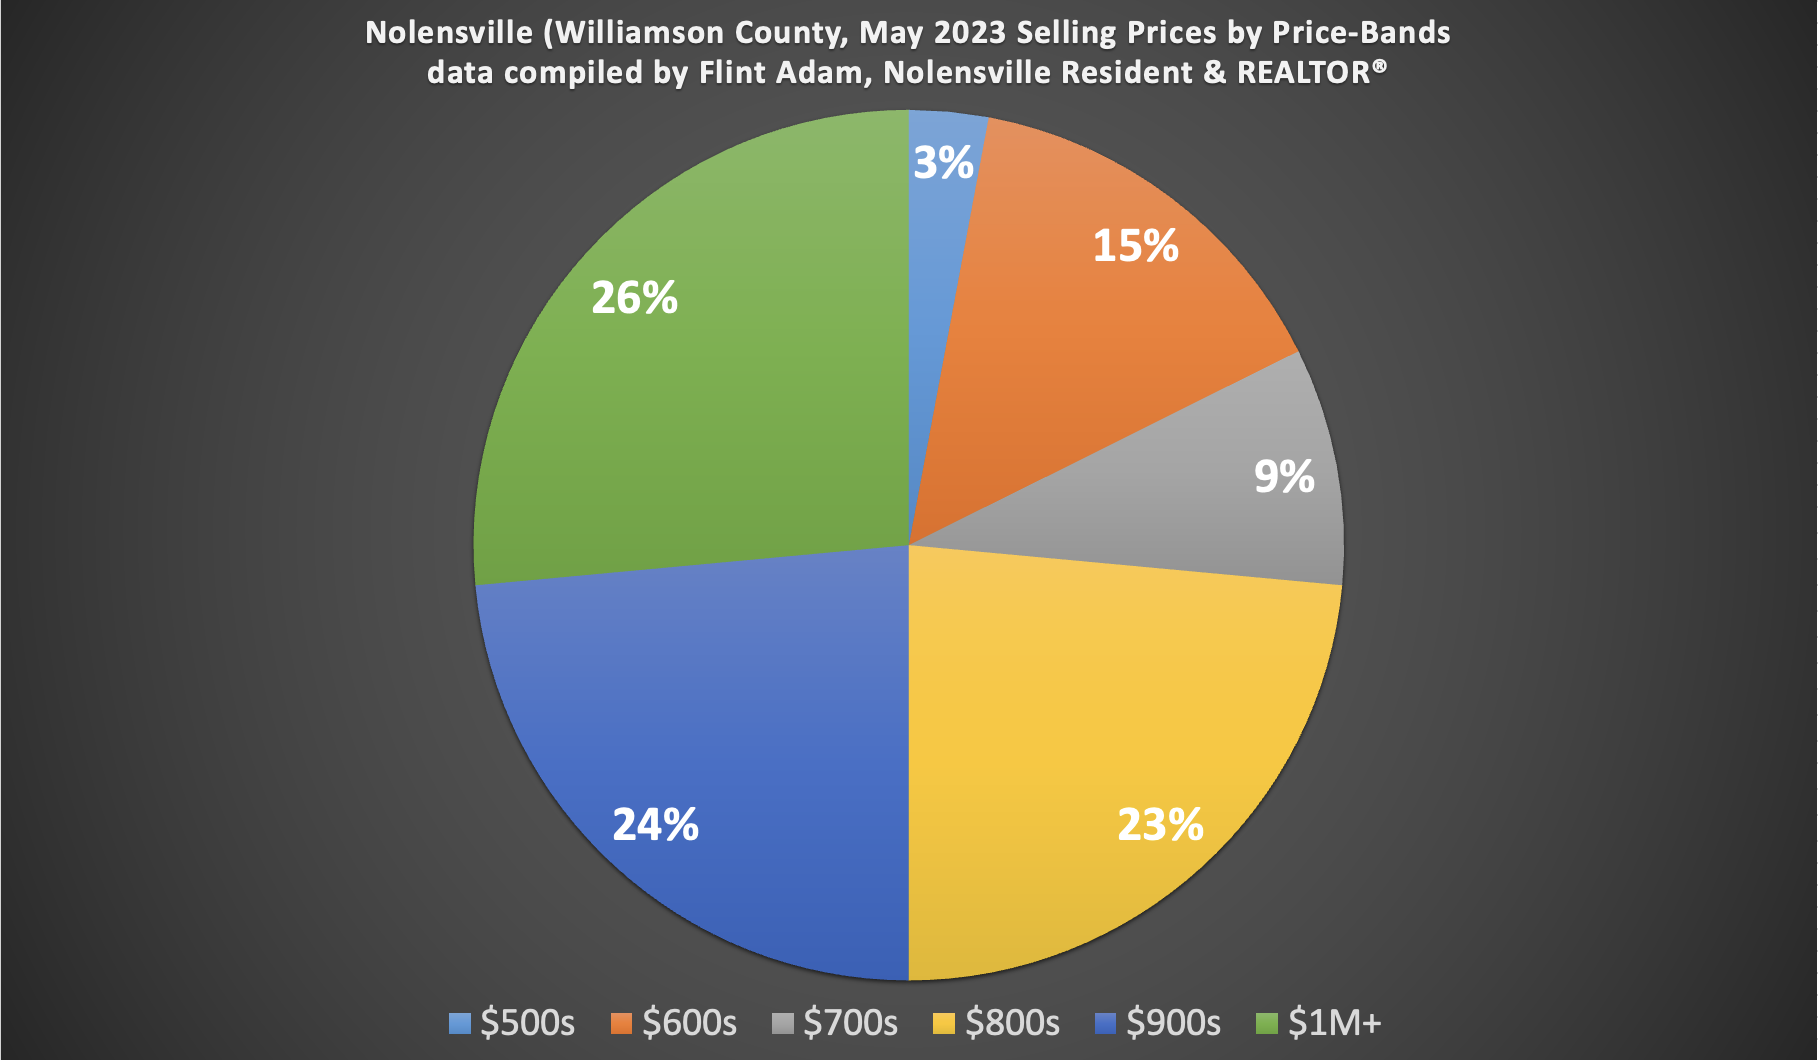 Nolensville (Williamson County, May 2023 Selling Prices by Price-Bands data compiled by Flint Adam, Nolensville Resident & REALTOR®